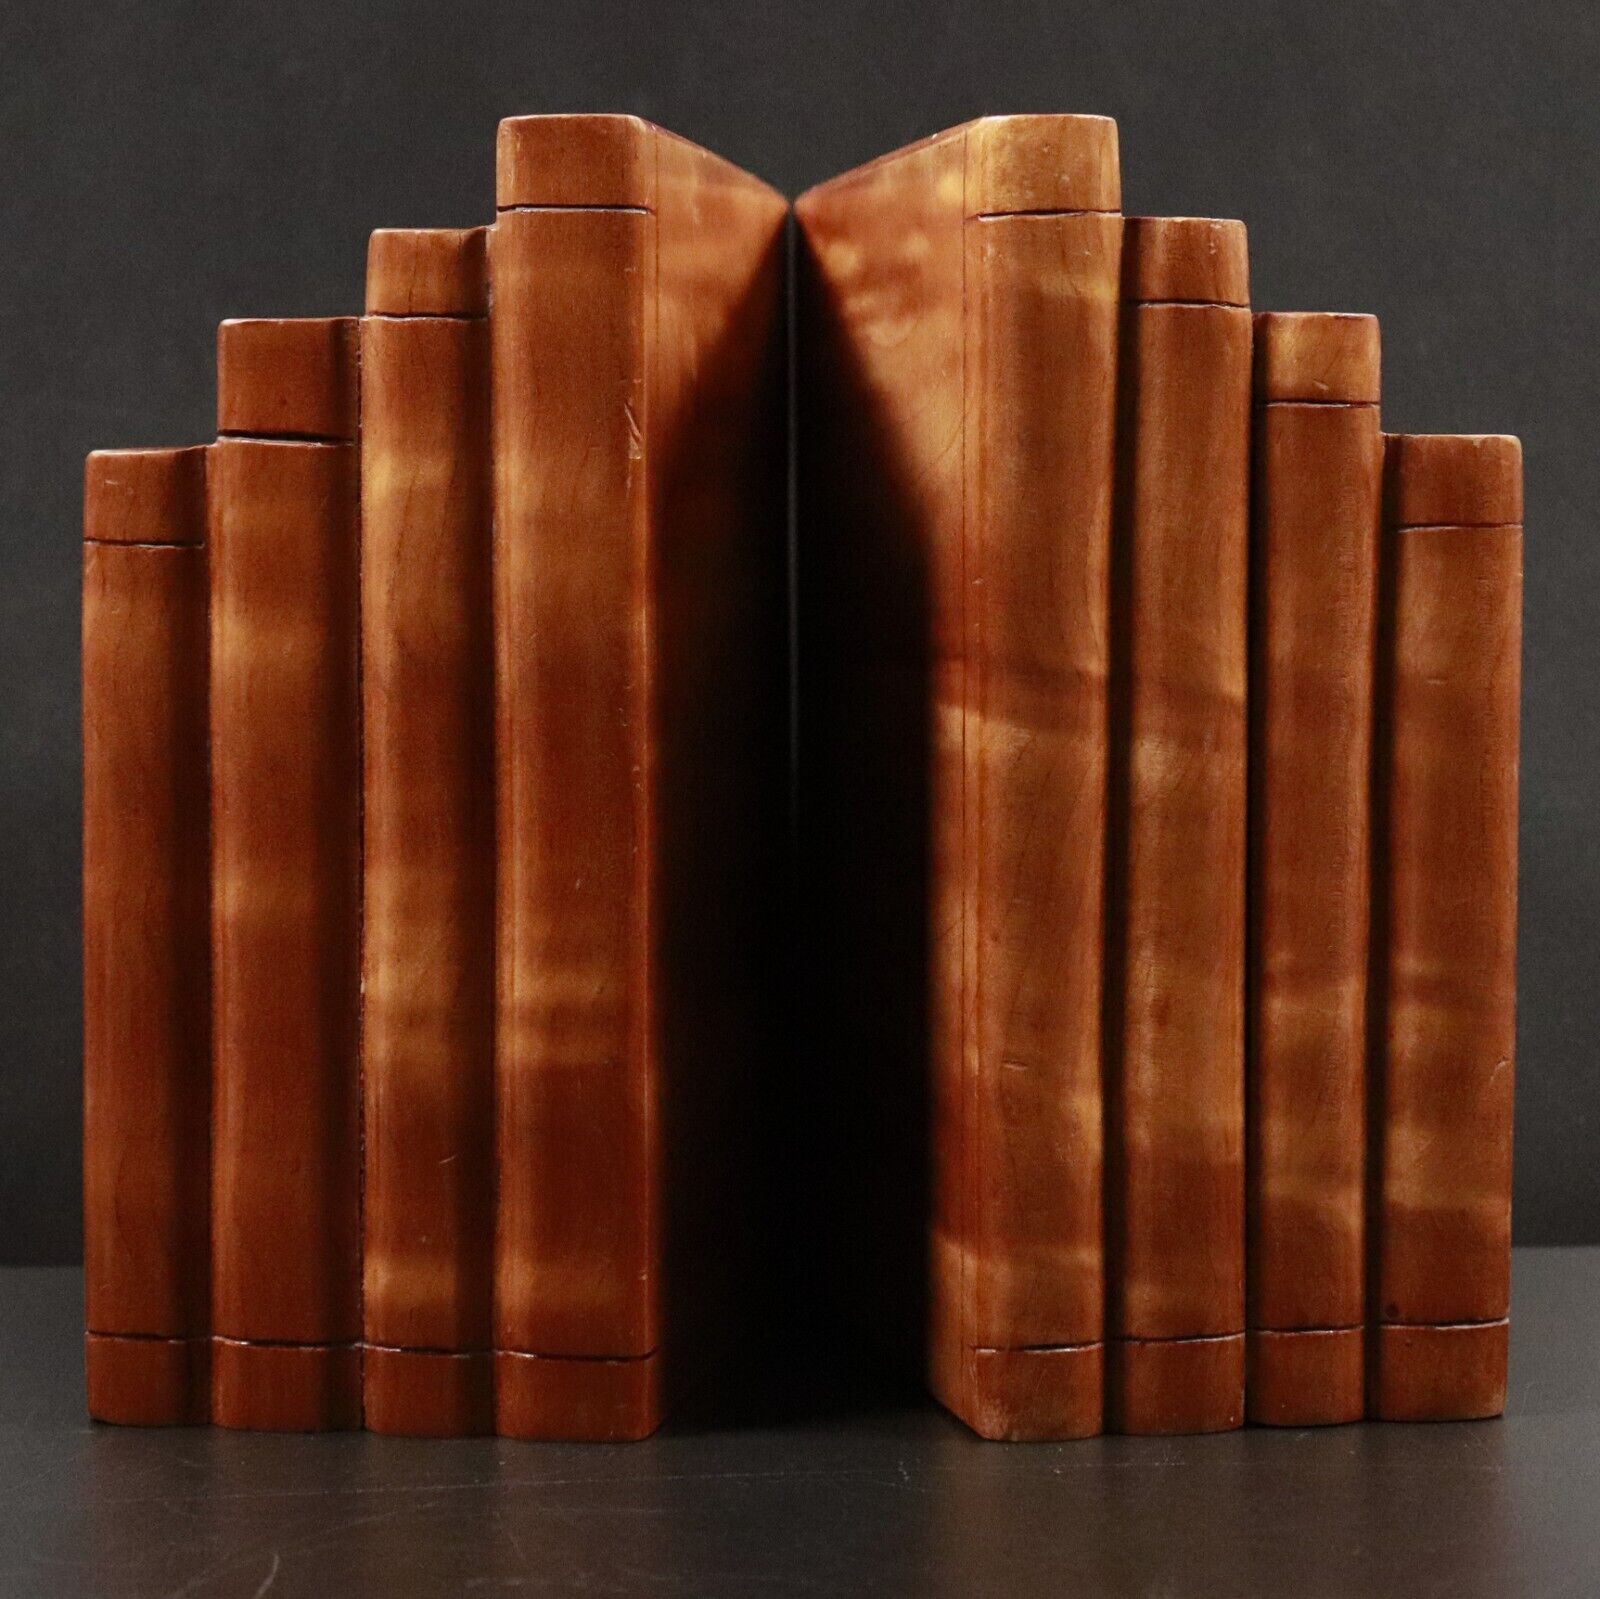 c1930's Art Deco Style Book Ends Antique Flamed Queensland Maple Bookends